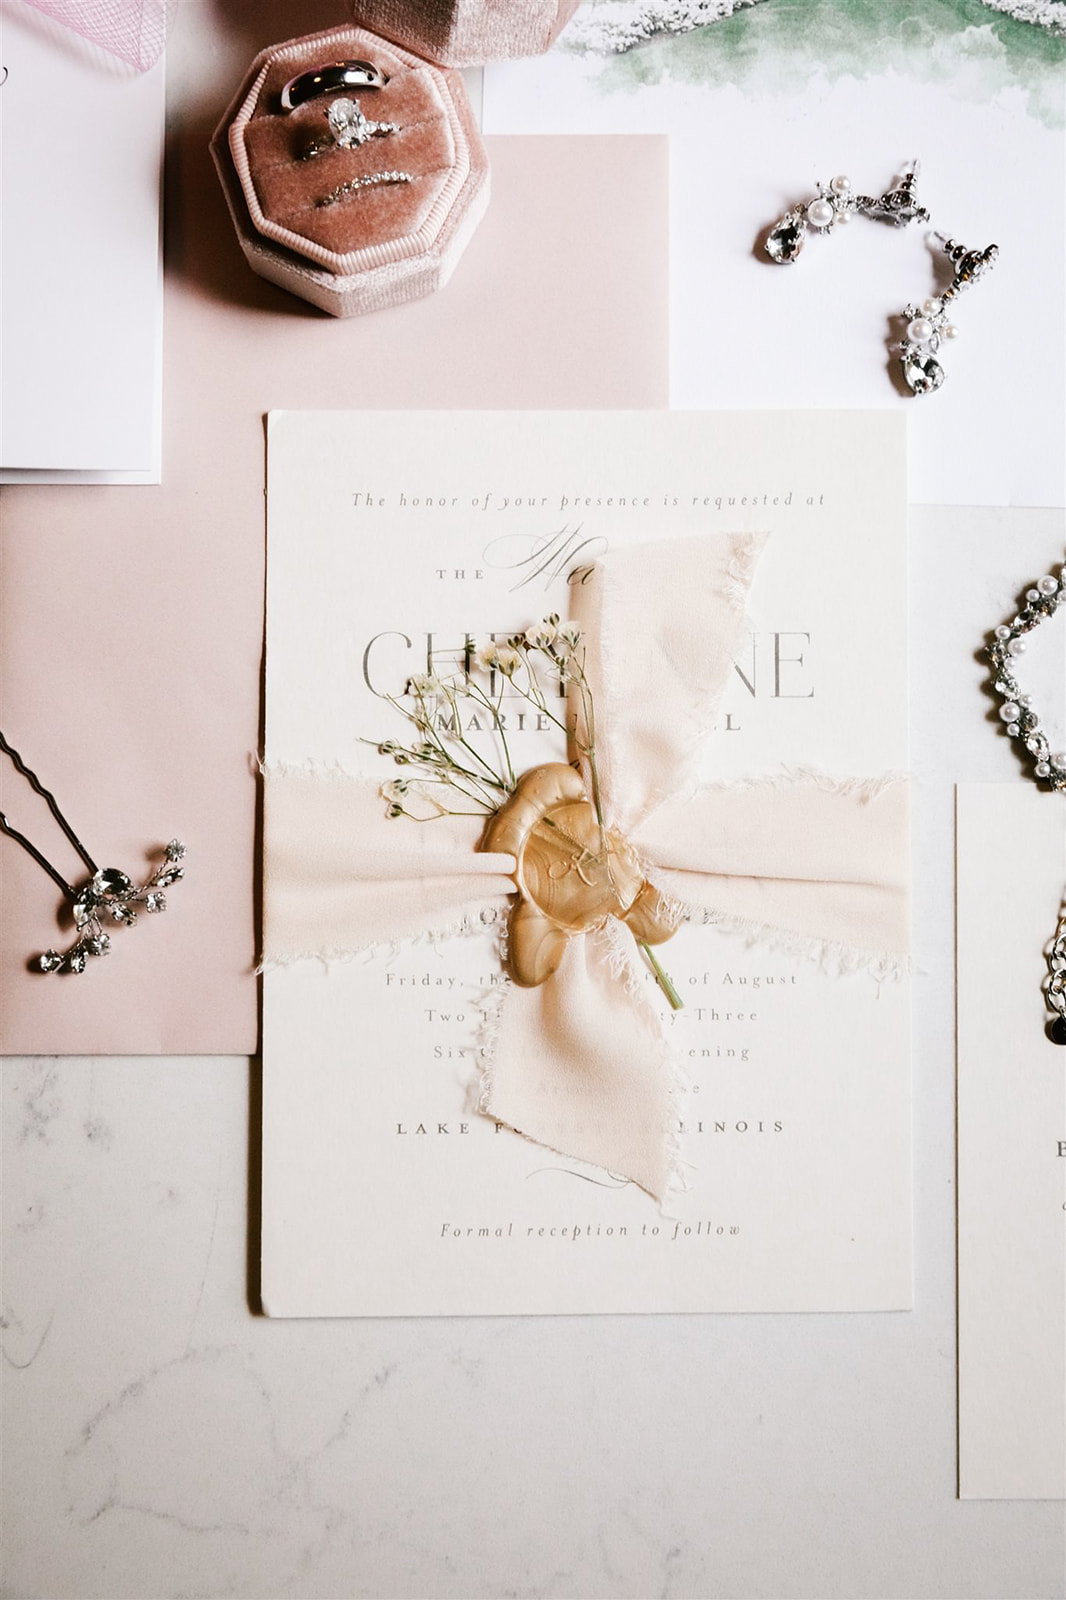 Pink wedding details add a touch of romance and elegance, infusing the day with a soft and beautiful tone.